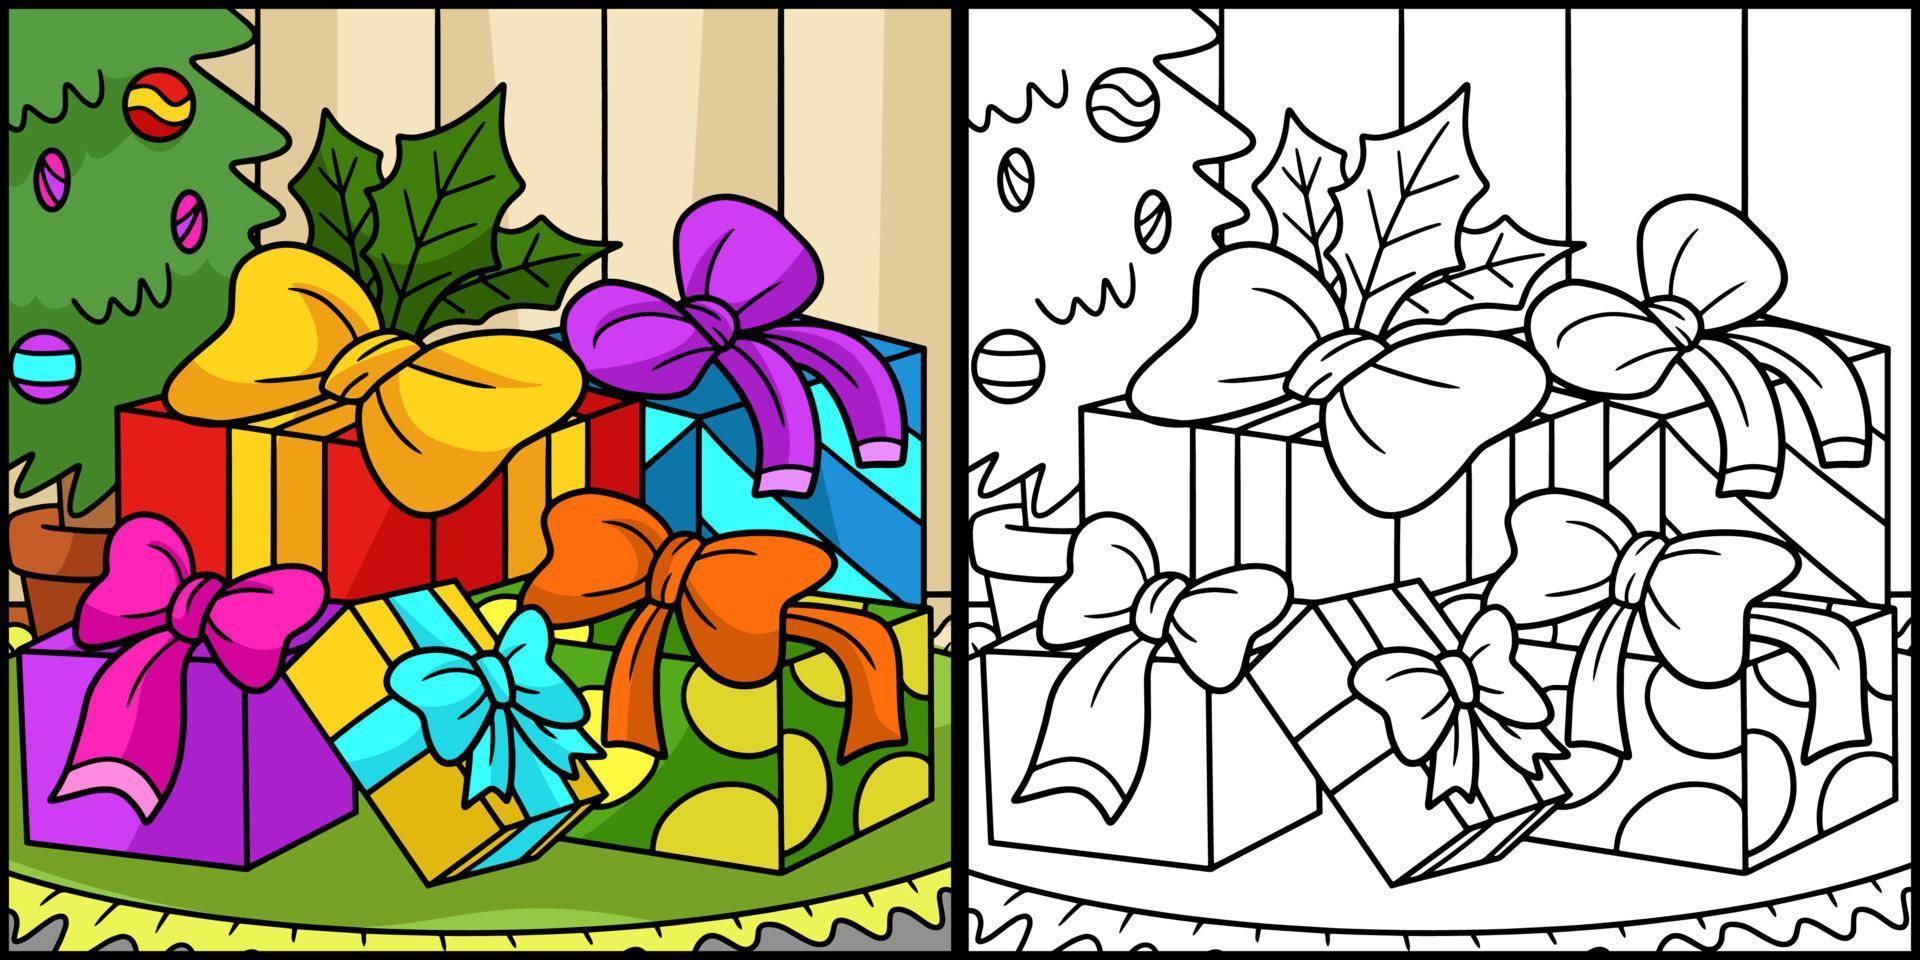 Christmas Gifts Coloring Page Colored Illustration vector